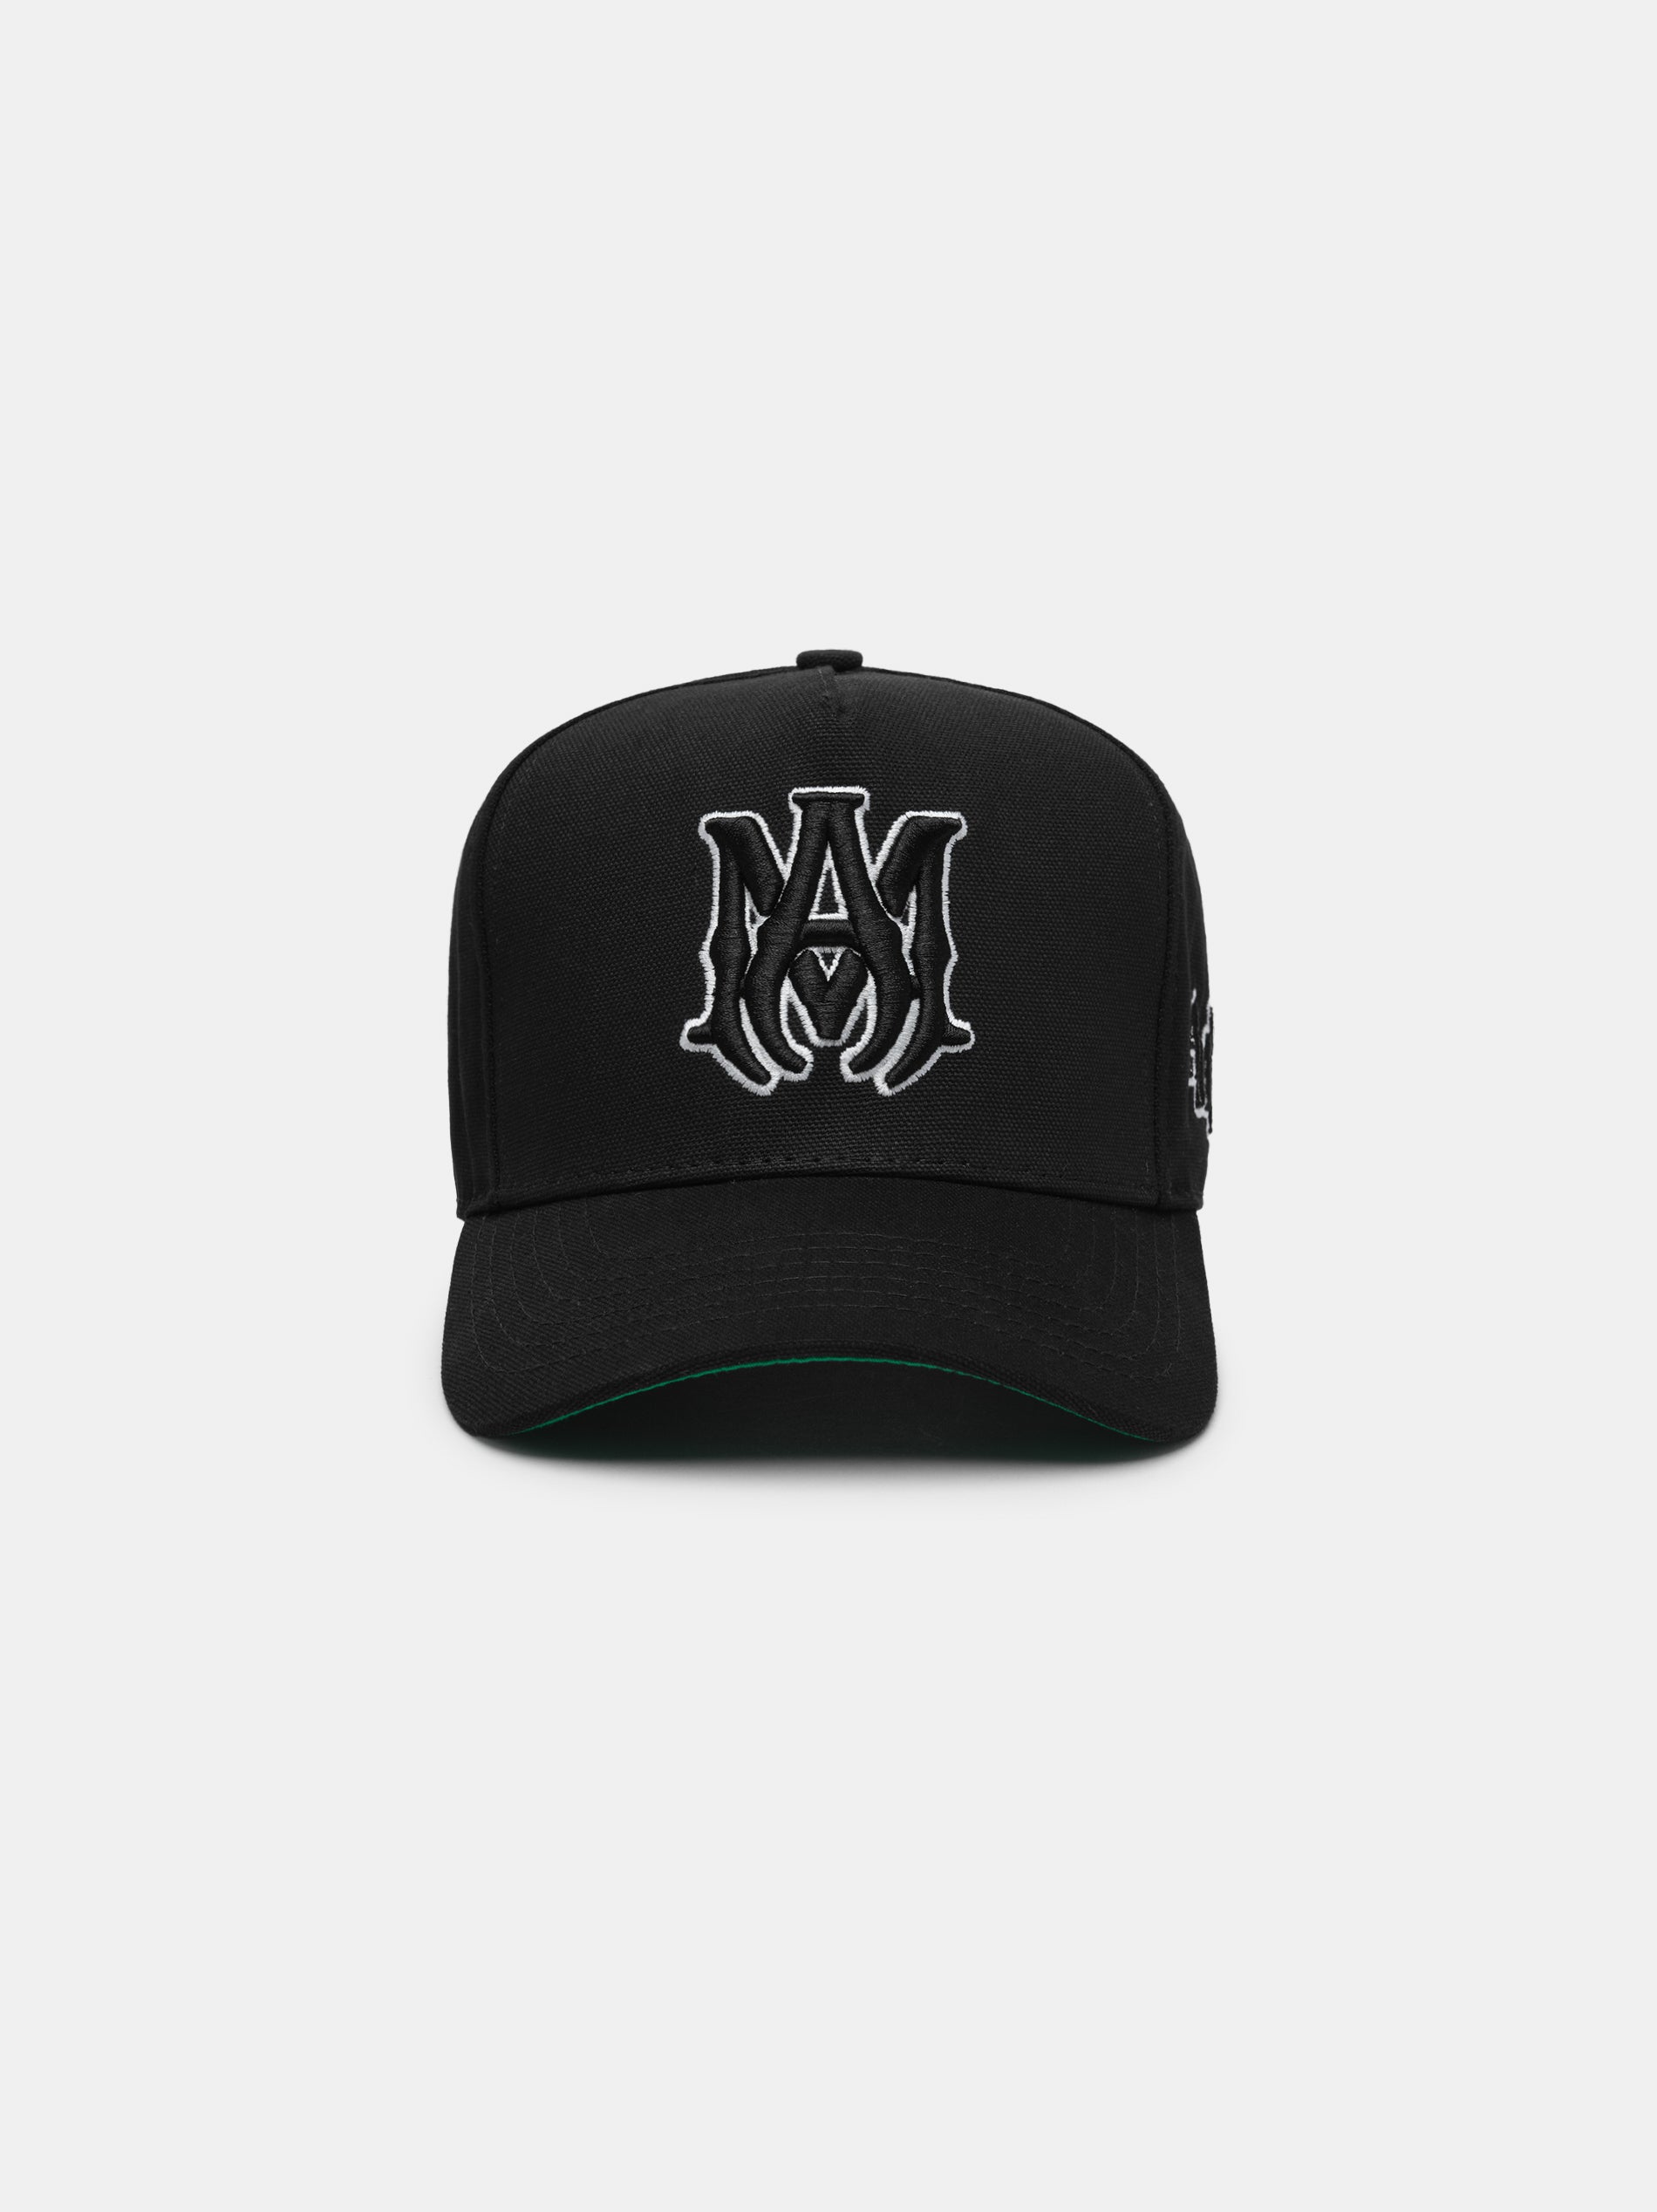 Product MA STAGGERED AMIRI FULL CANVAS HAT - Black Black featured image